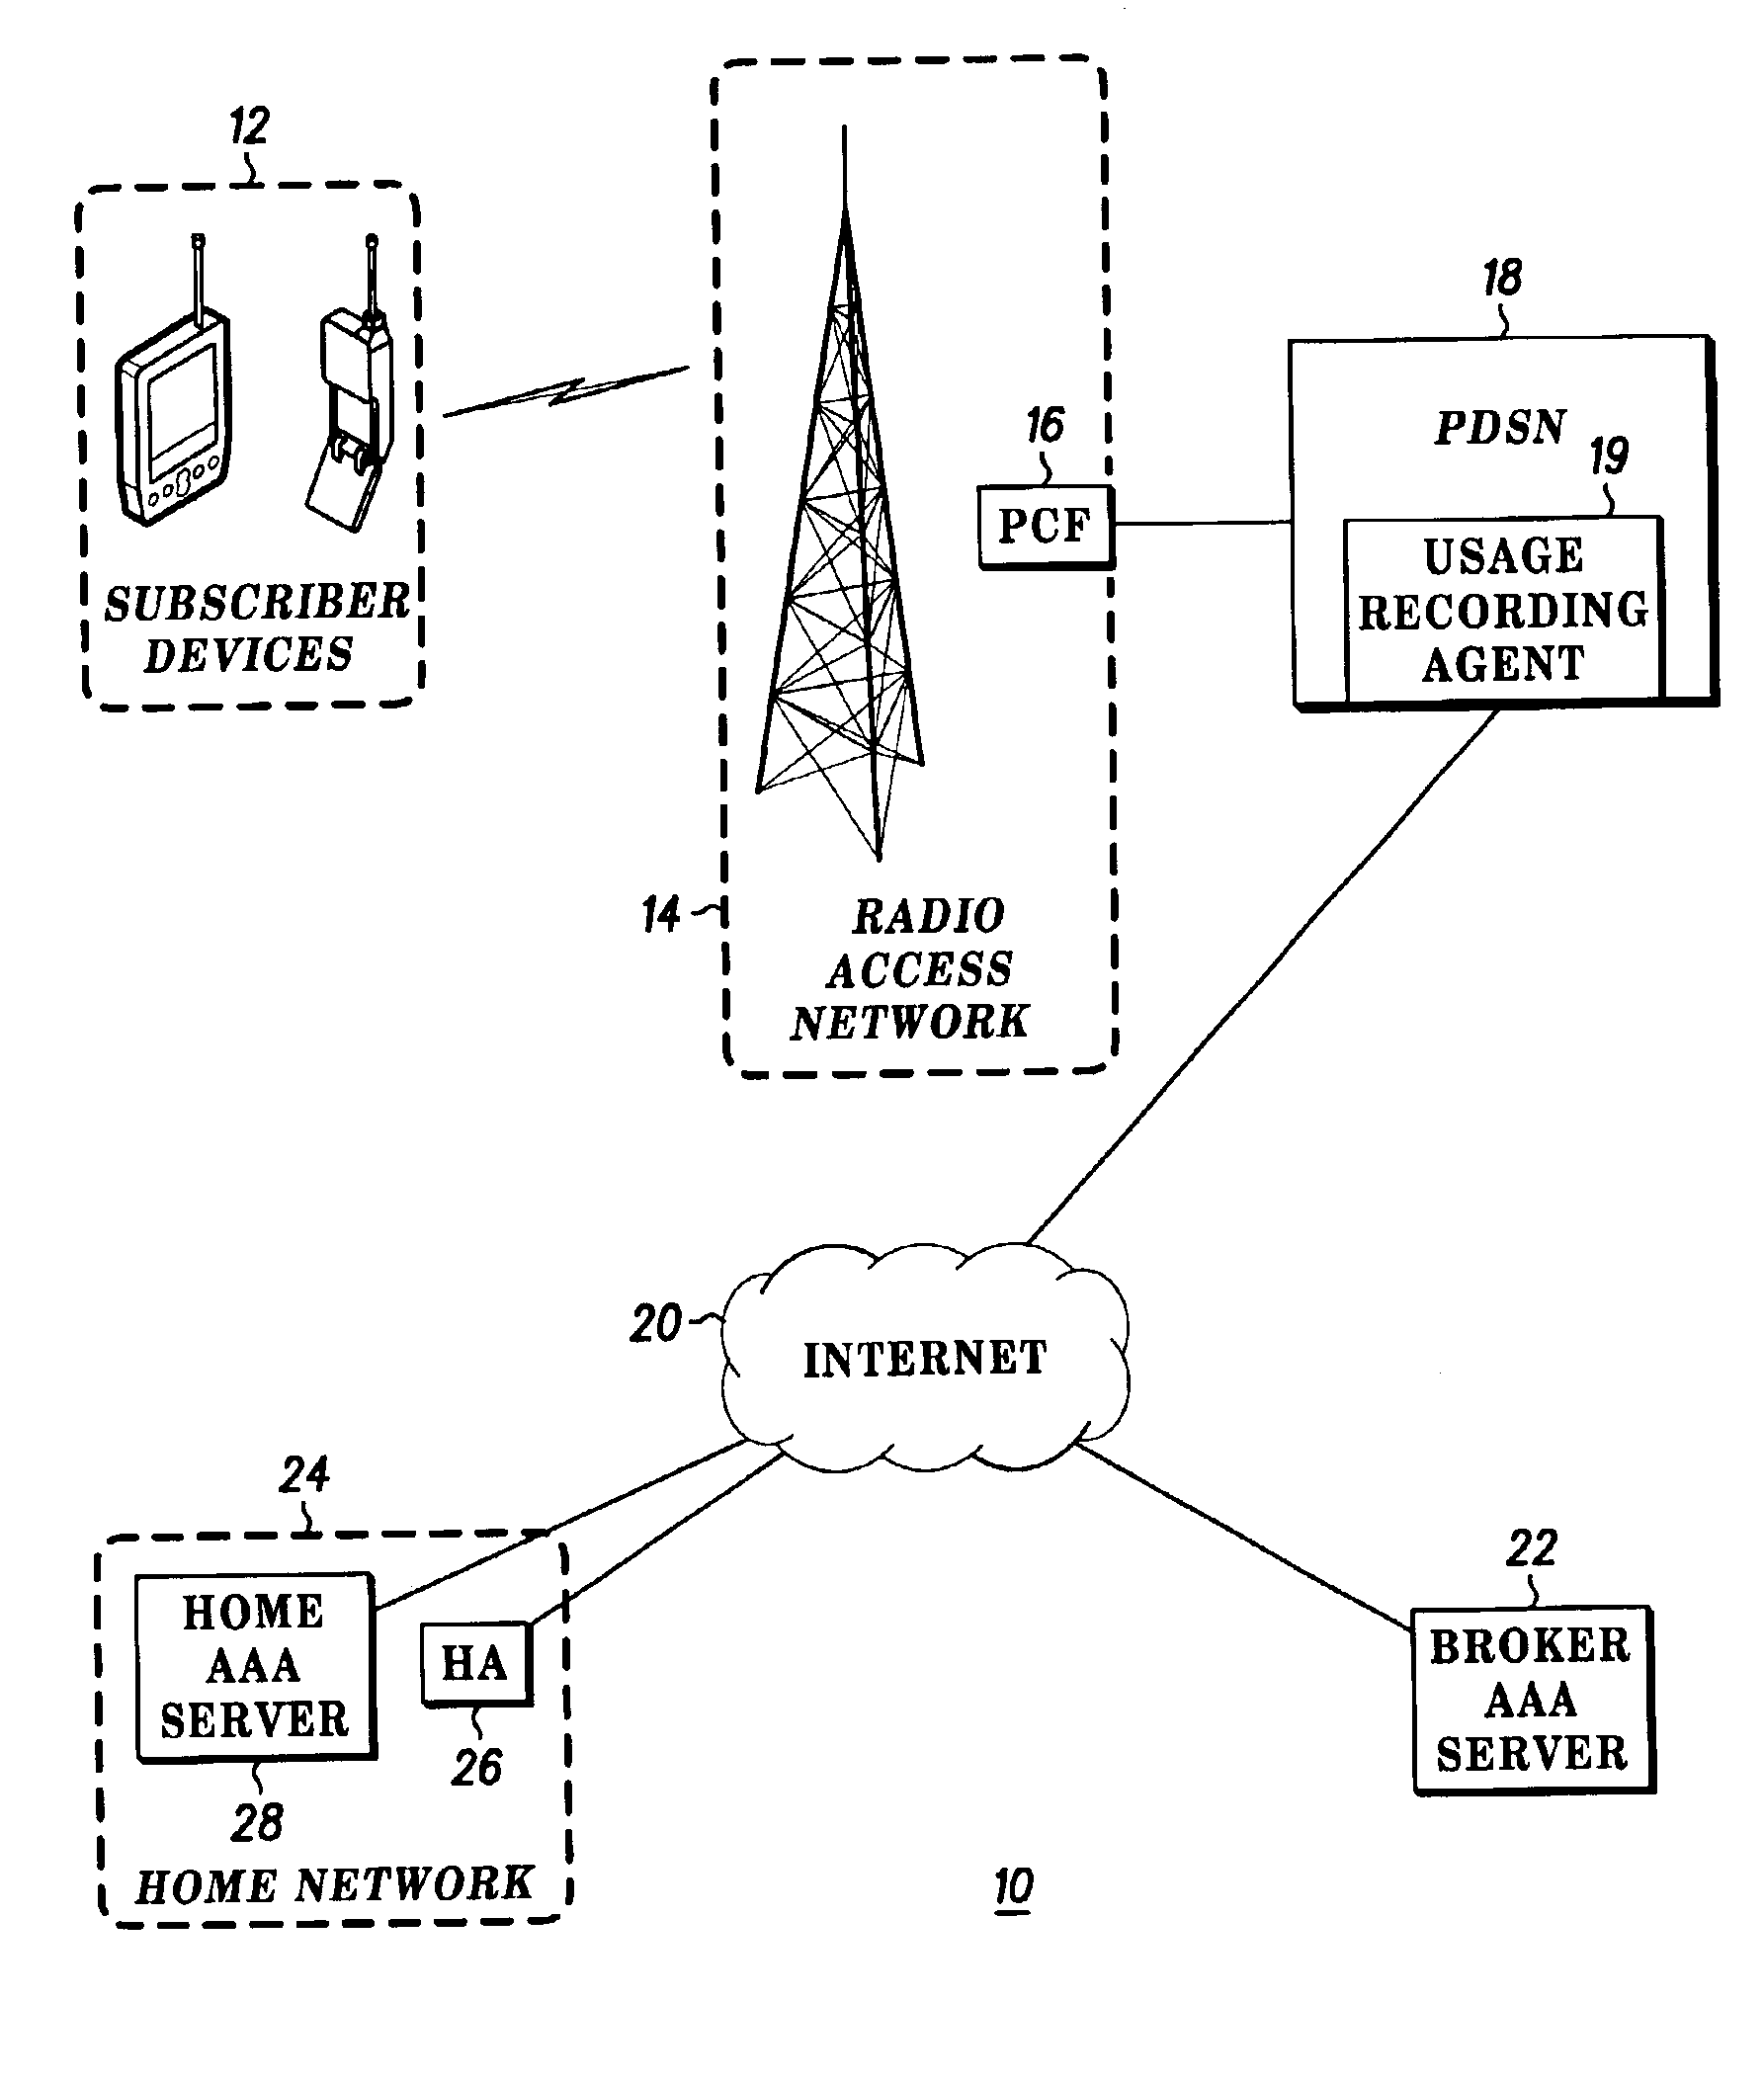 Method and device for providing more accurate subscriber device billing